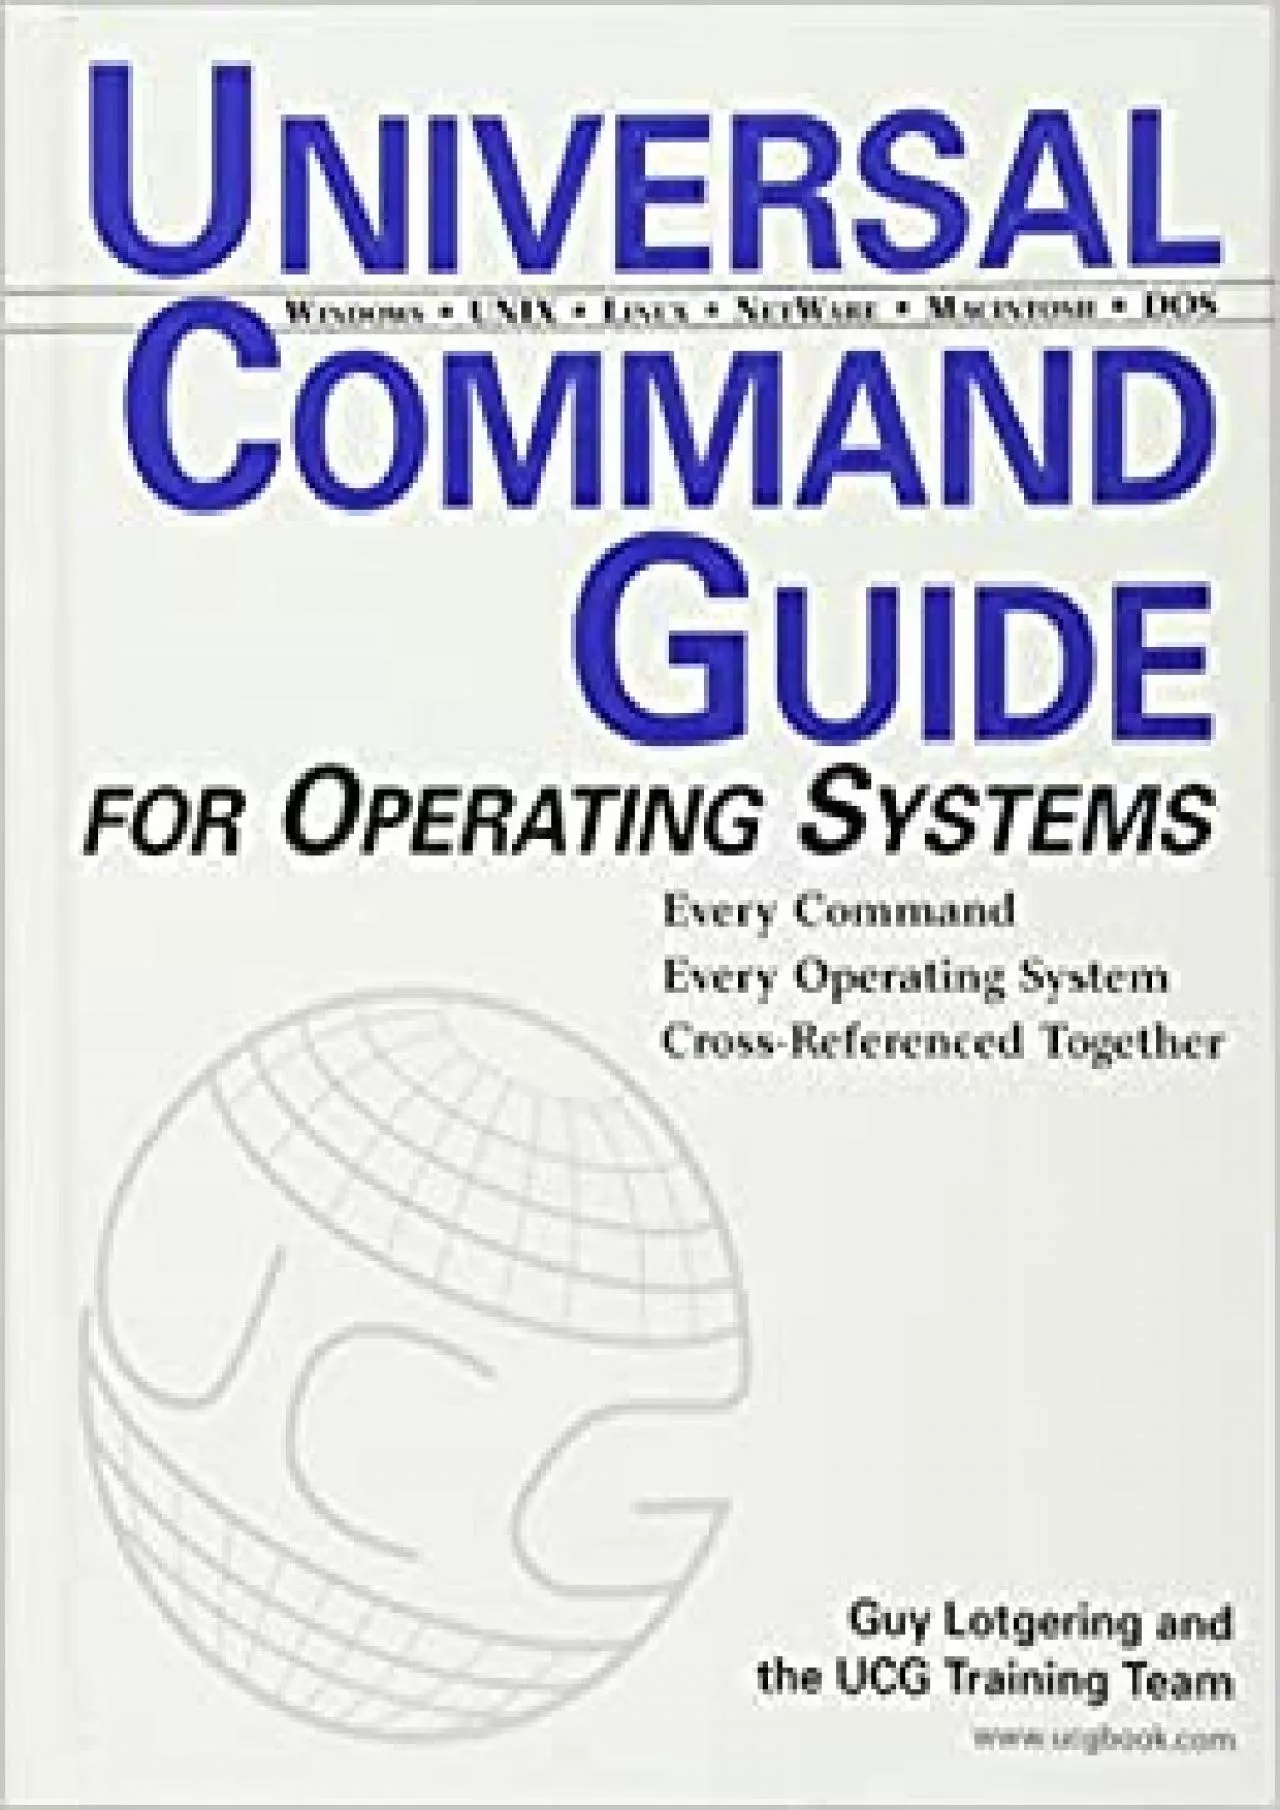 (DOWNLOAD)-Universal Command Guide For Operating Systems